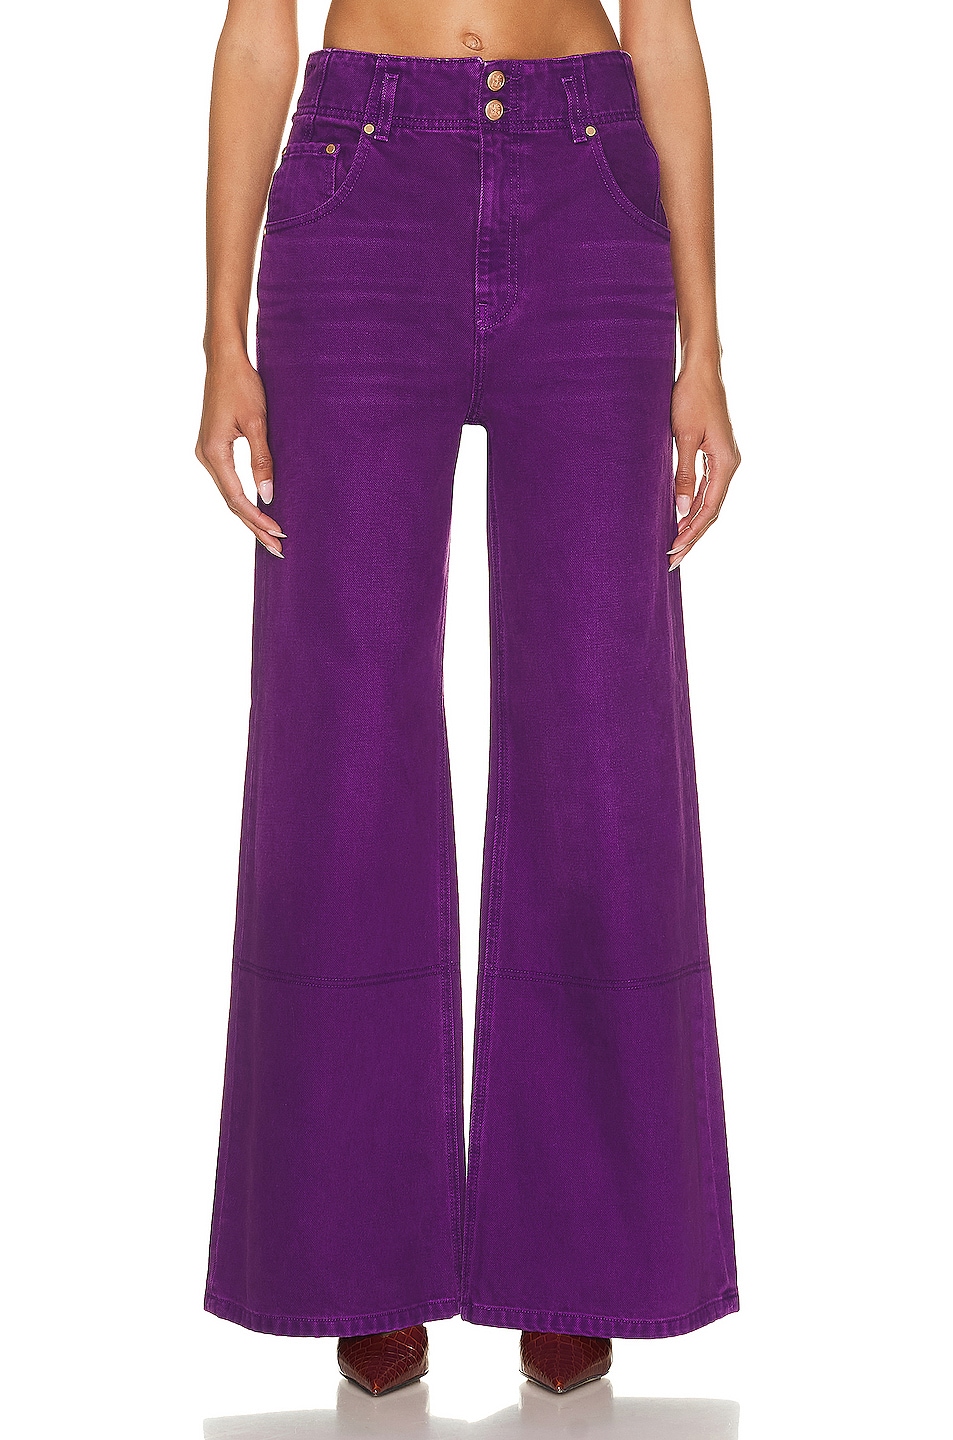 Image 1 of Ulla Johnson Margot Pant in Cassis Wash